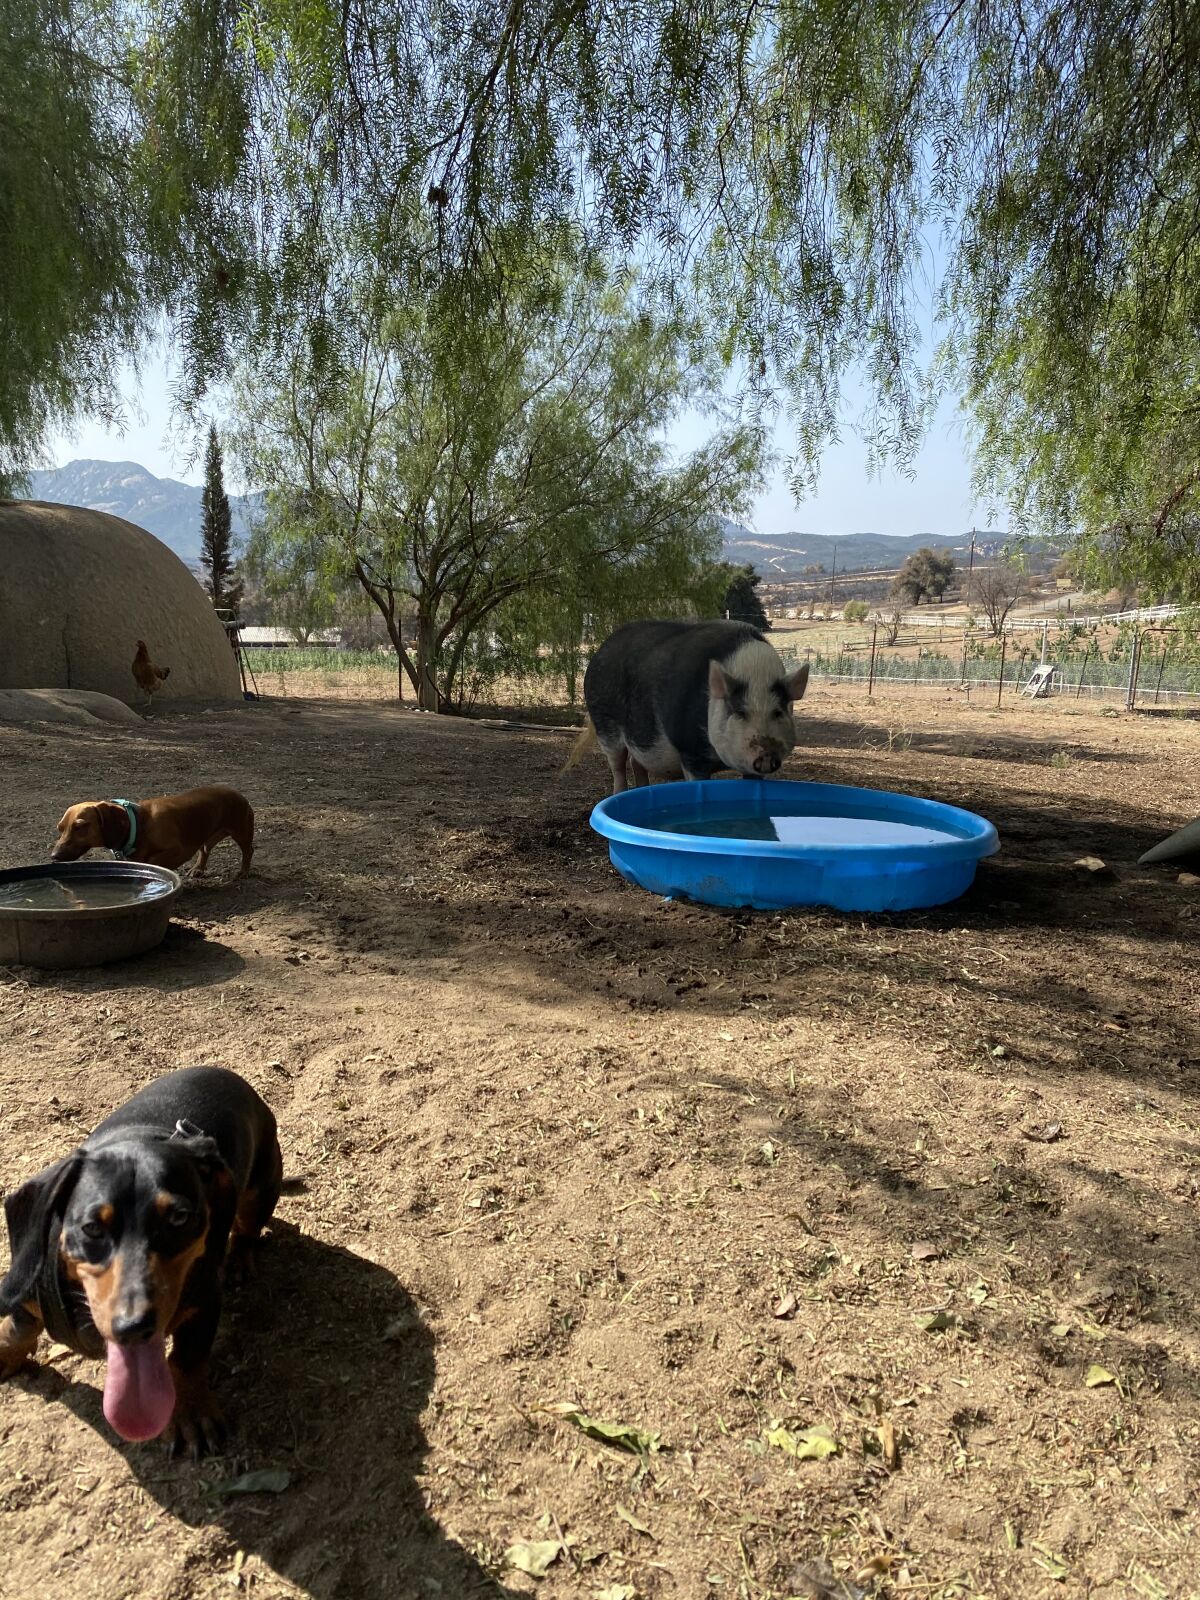 A pig and two dogs drinking water from kiddie pools.